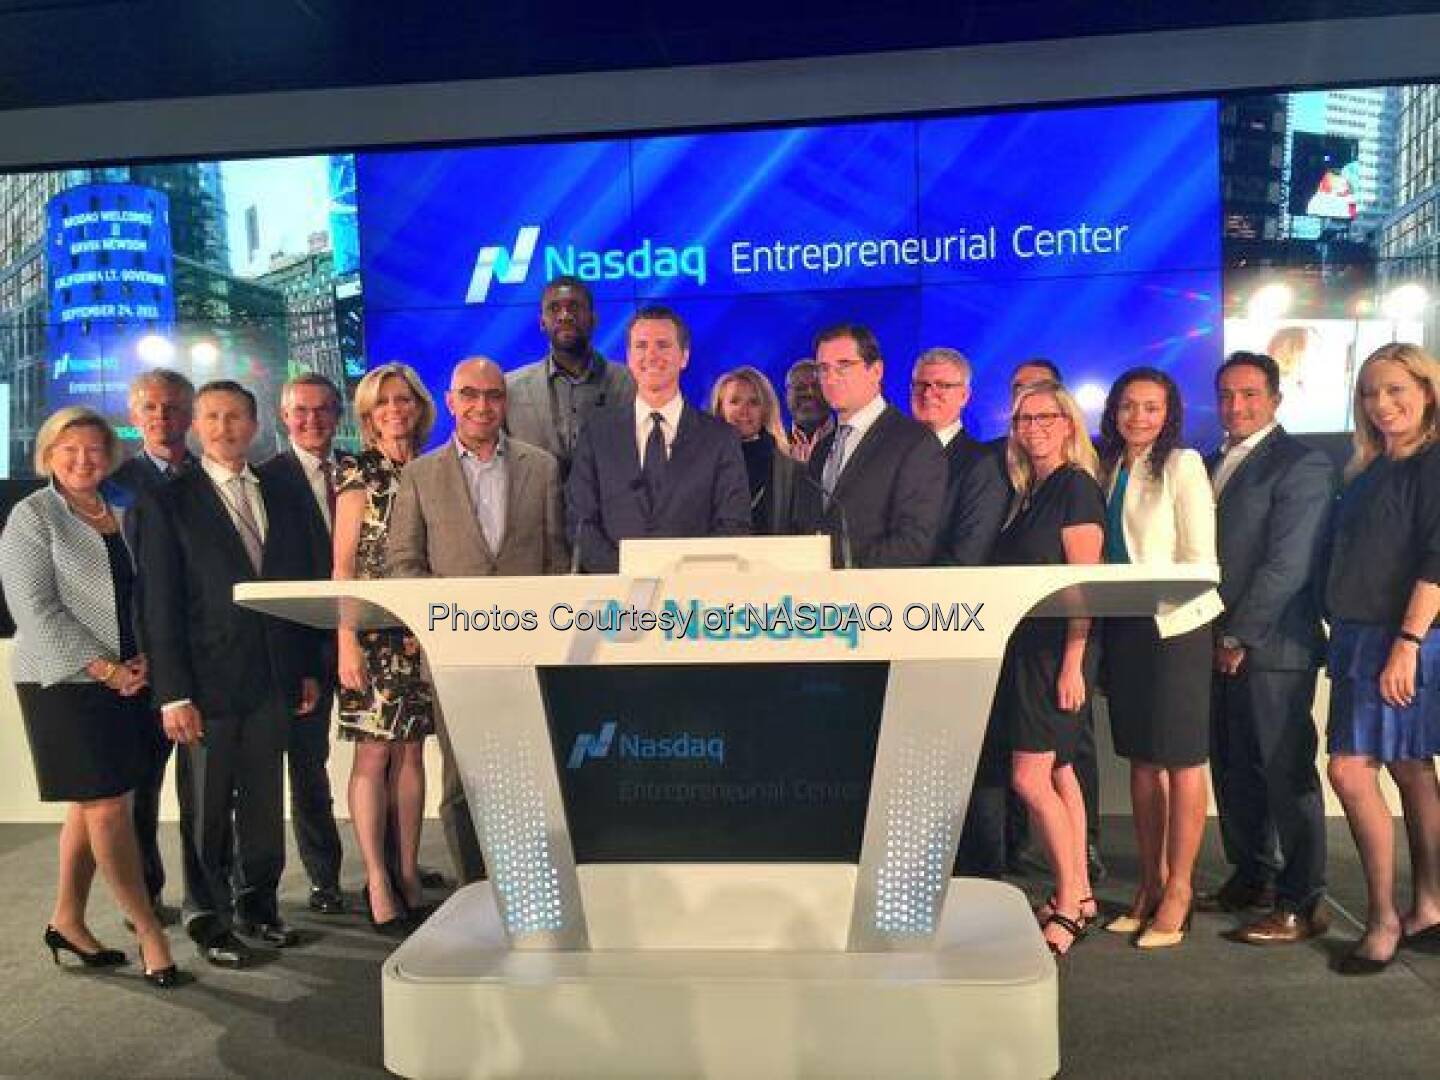 A big thank you to KPMG for making the Center a reality! KPMG's Private Markets Group is a founding sponsor of the Nasdaq Entrepreneurial Center, a central hub for entrepreneurs from all industries, which launched yesterday in San Francisco. #theCenterSF Source: http://facebook.com/NASDAQ